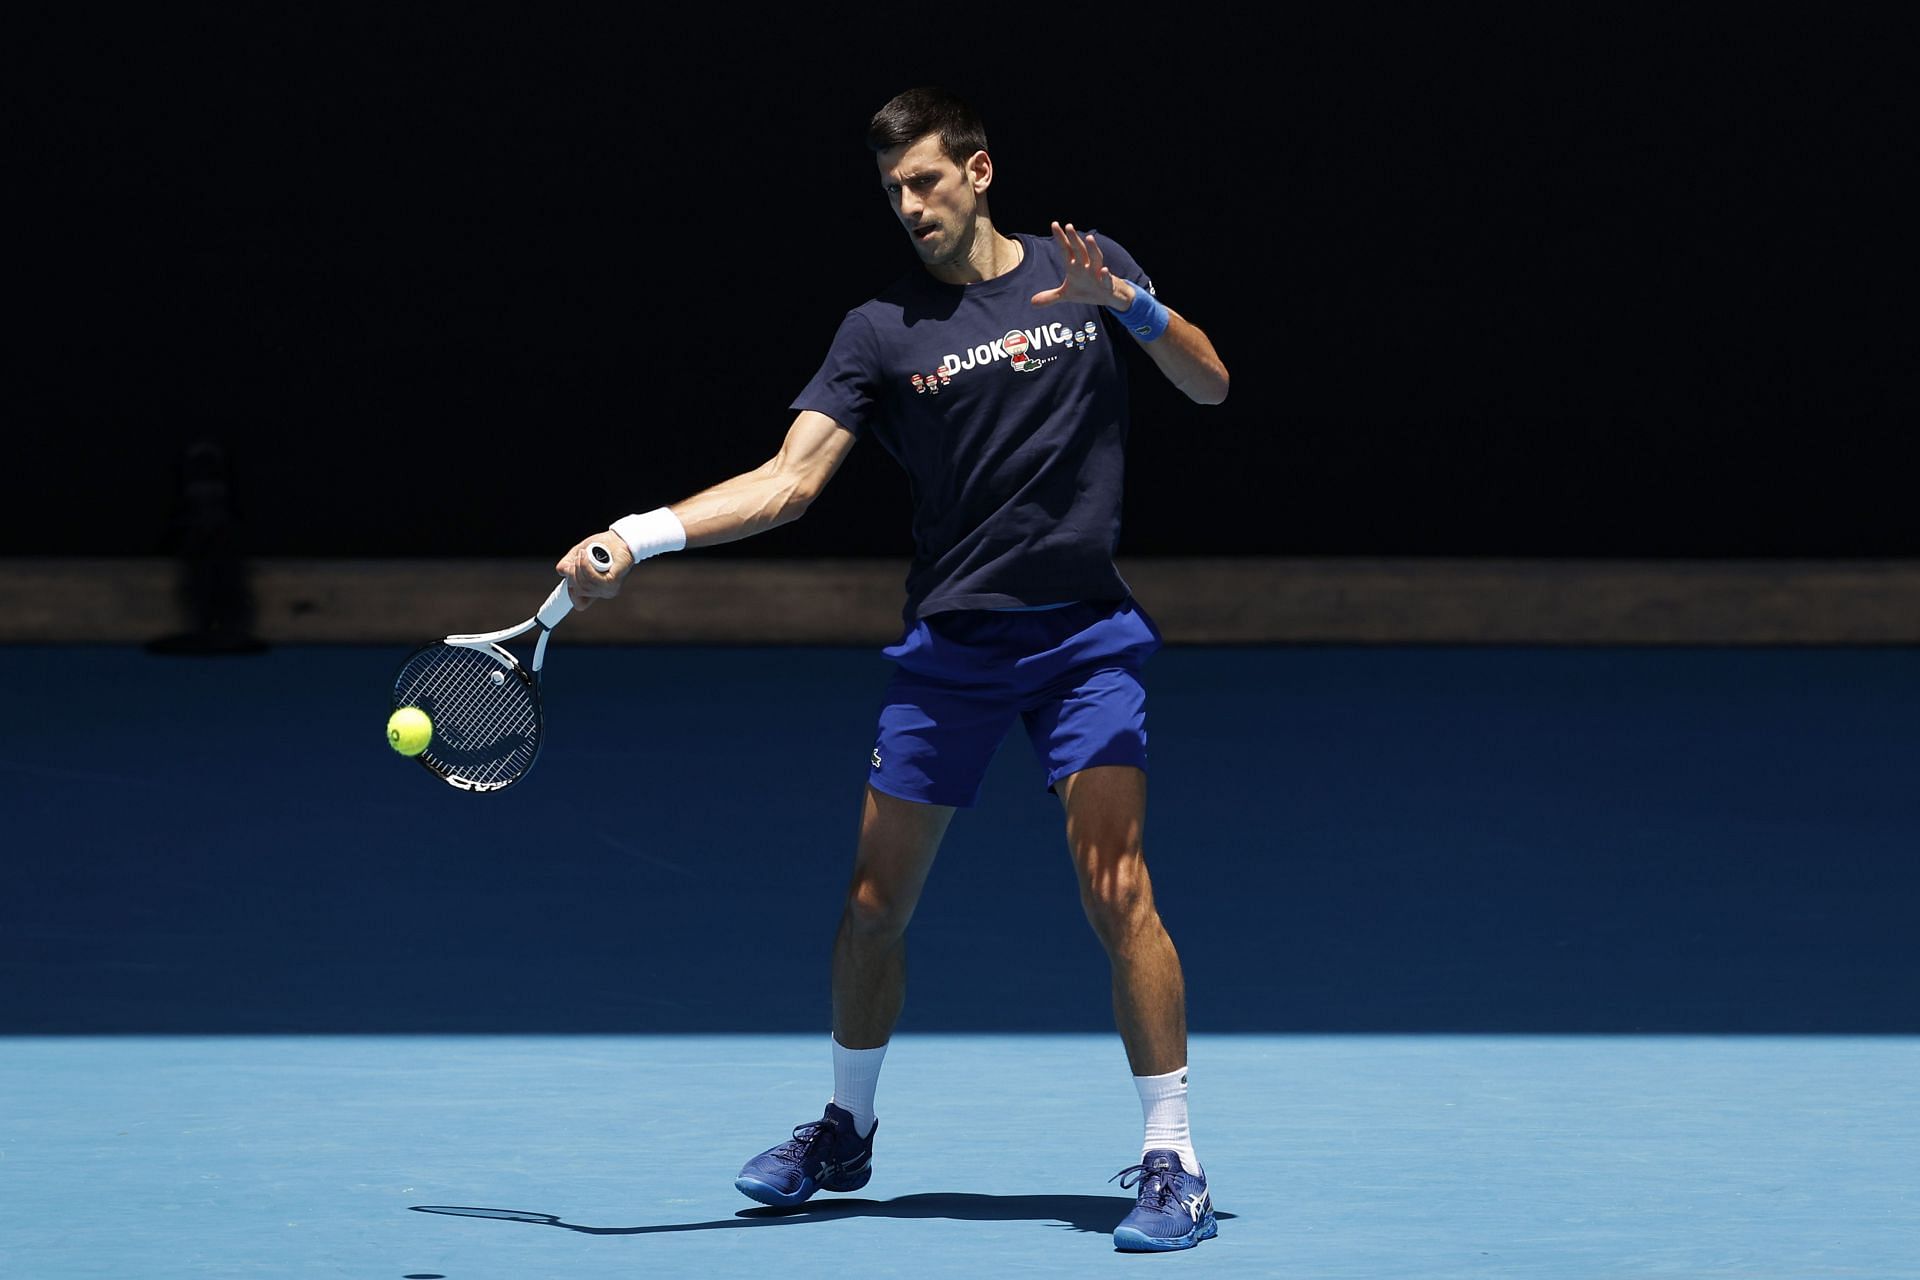 Novak Djokovic is on the entry lists of the Dubai Tennis Championships and the Indian Wells Masters